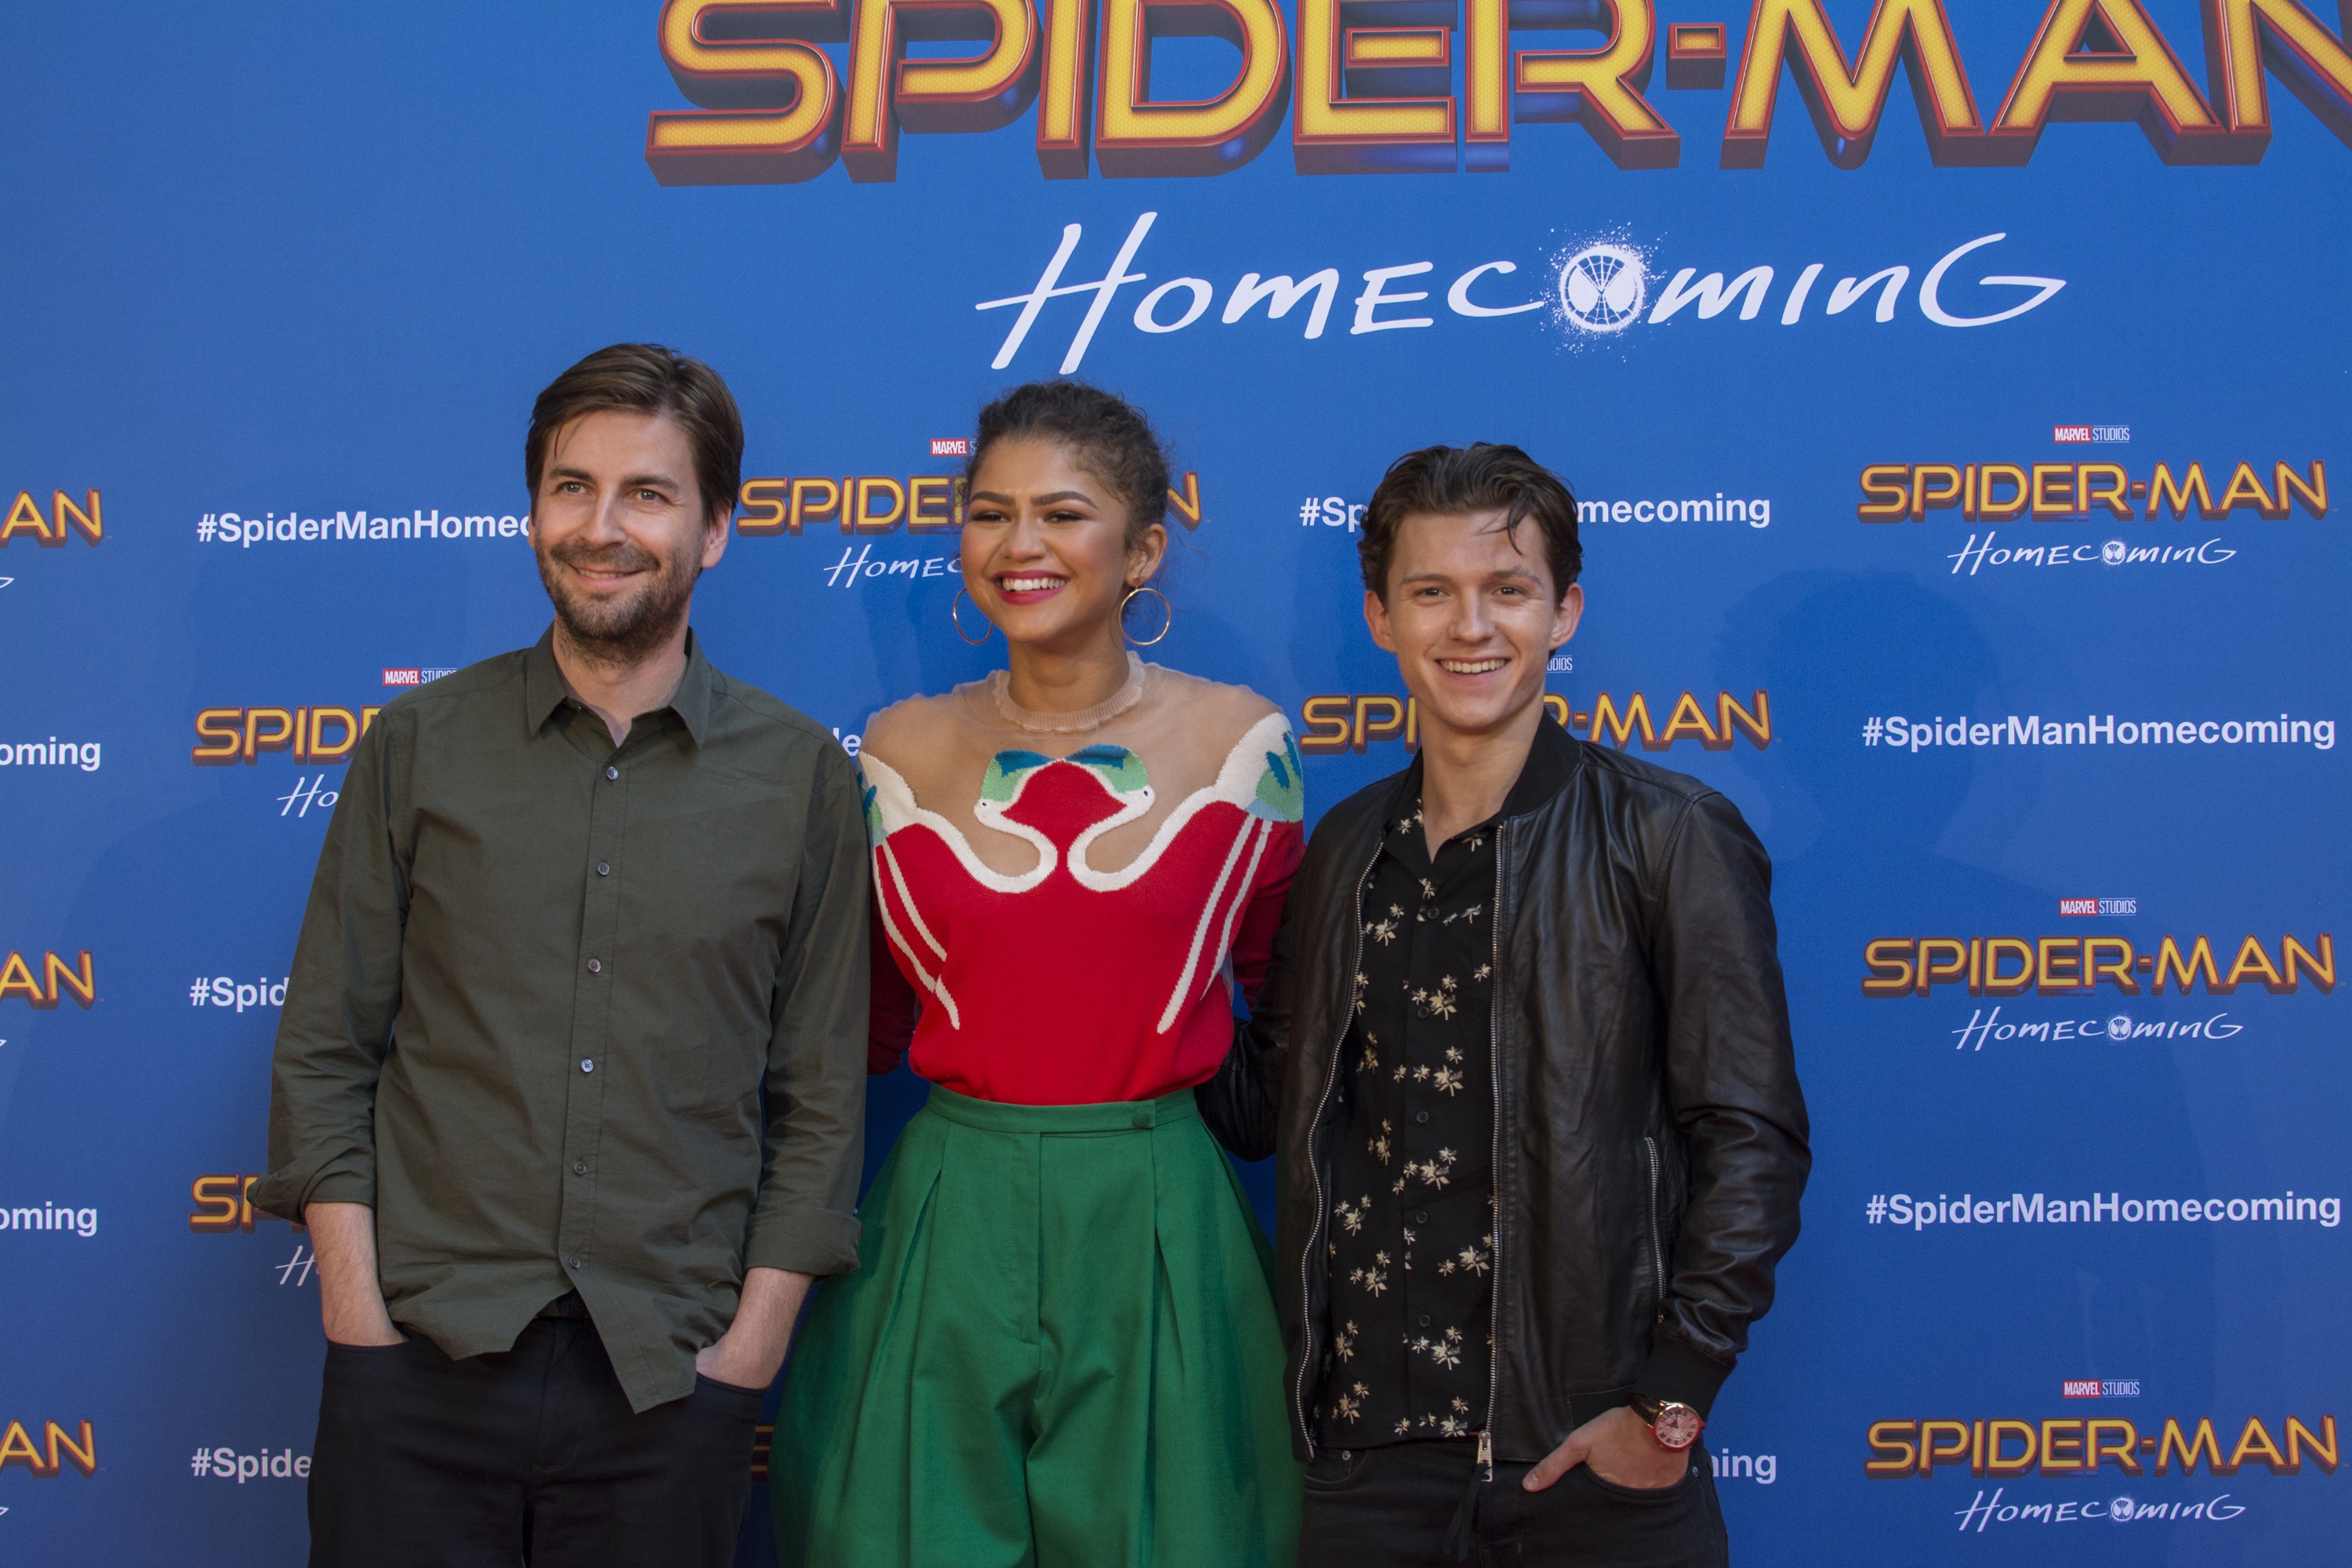 The cast of Spider-Man